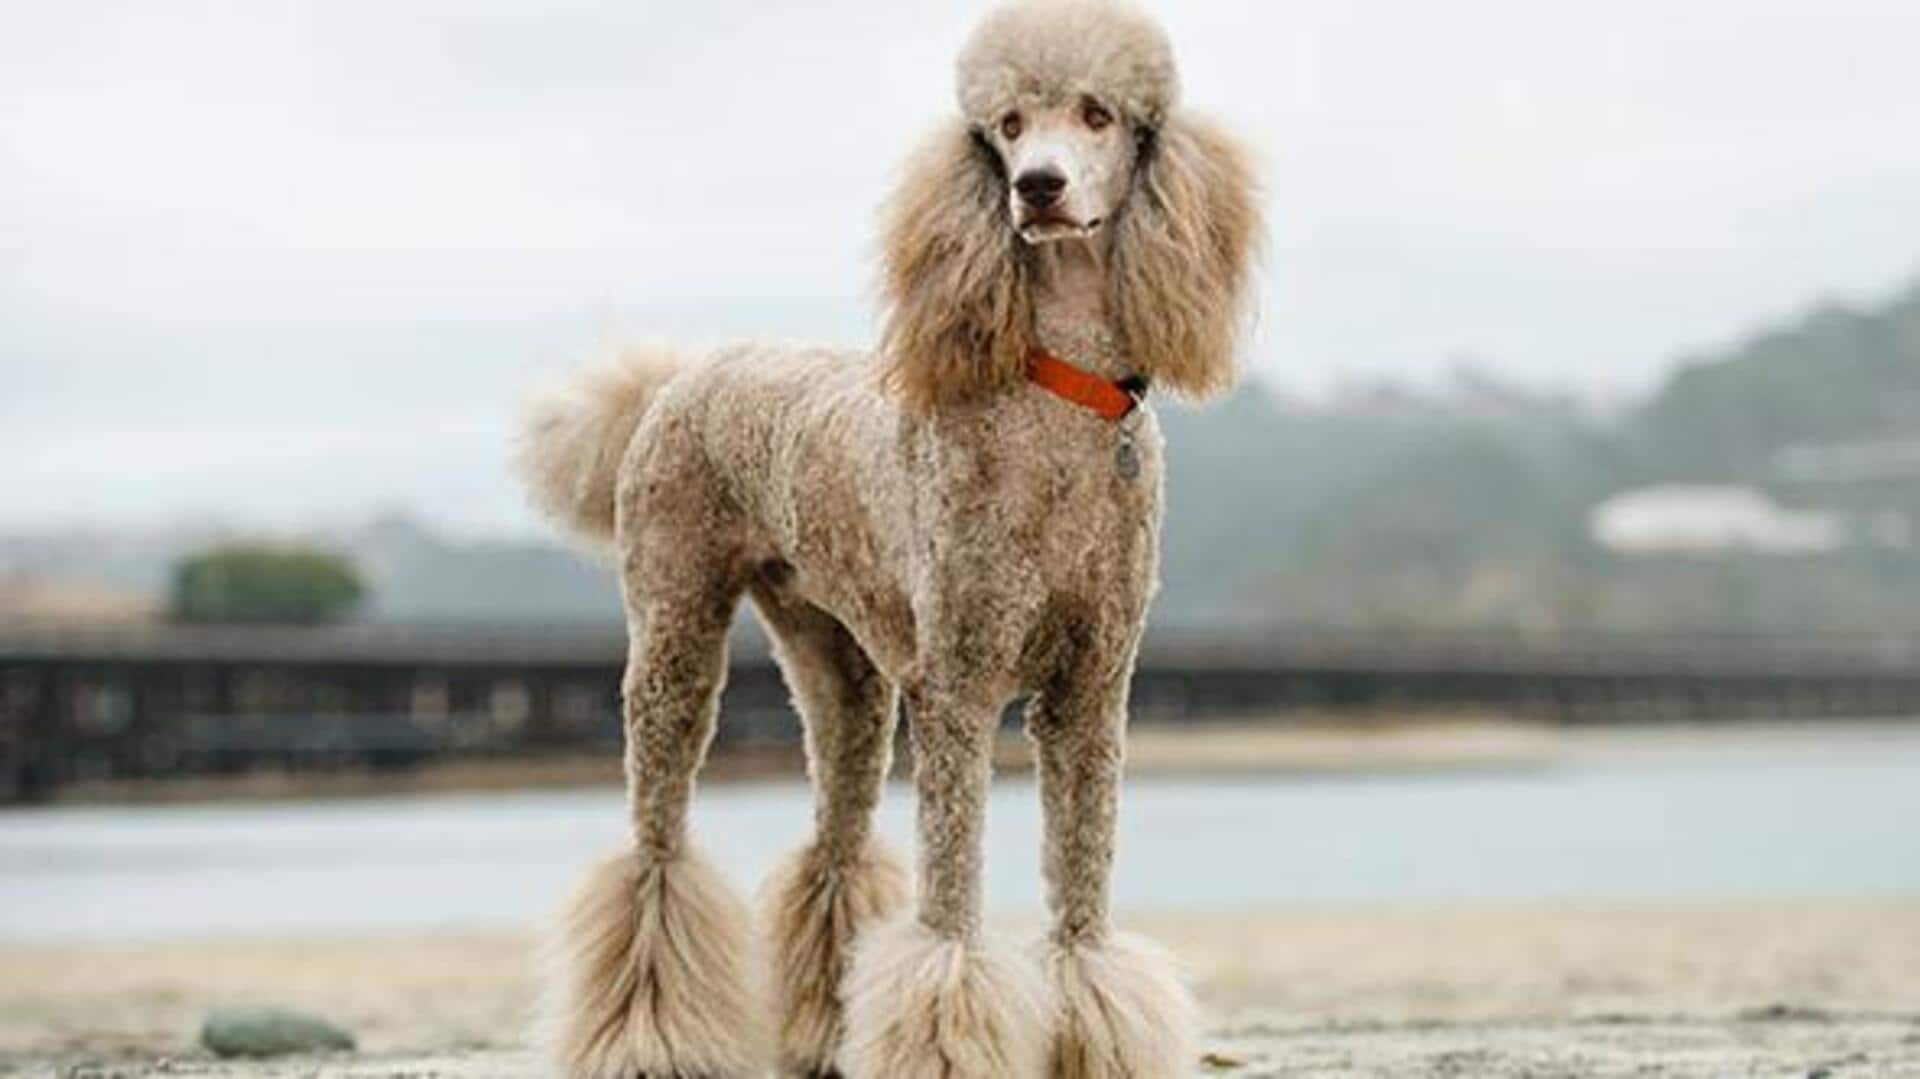 Got a Poodle? Check out its tail grooming tips